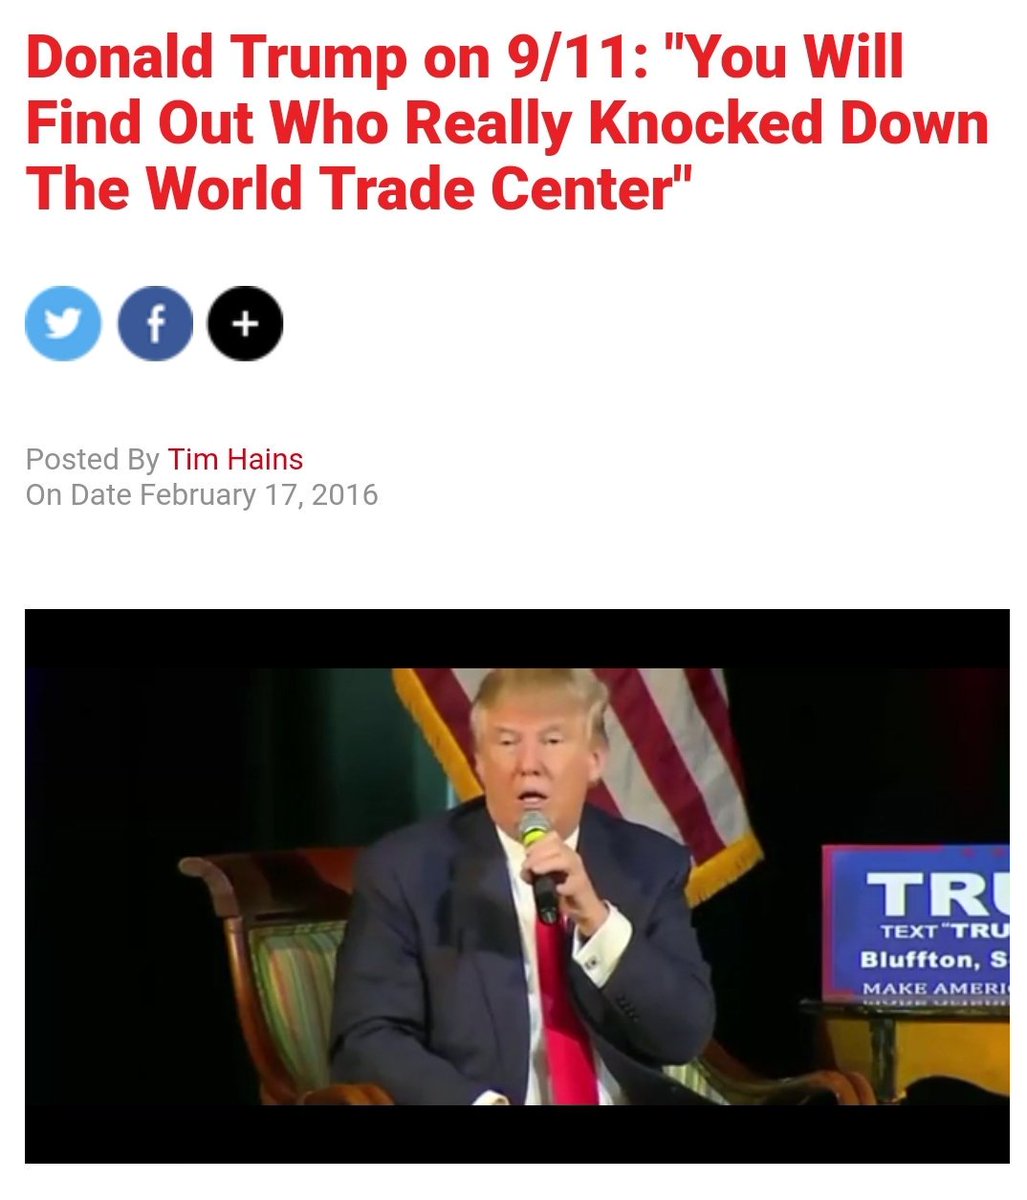 On many occasions Trump stated that he would reopen the 9/11 investigation. He expressed doubt about the official story and said their was secret information which had to be made public. Many 9/11 truthers stood behind him hoping he would honor his vow.  https://www.realclearpolitics.com/video/2016/02/17/trump_you_will_find_out_who_really_knocked_down_the_world_trade_center_secret_papers_may_blame_saudis.html